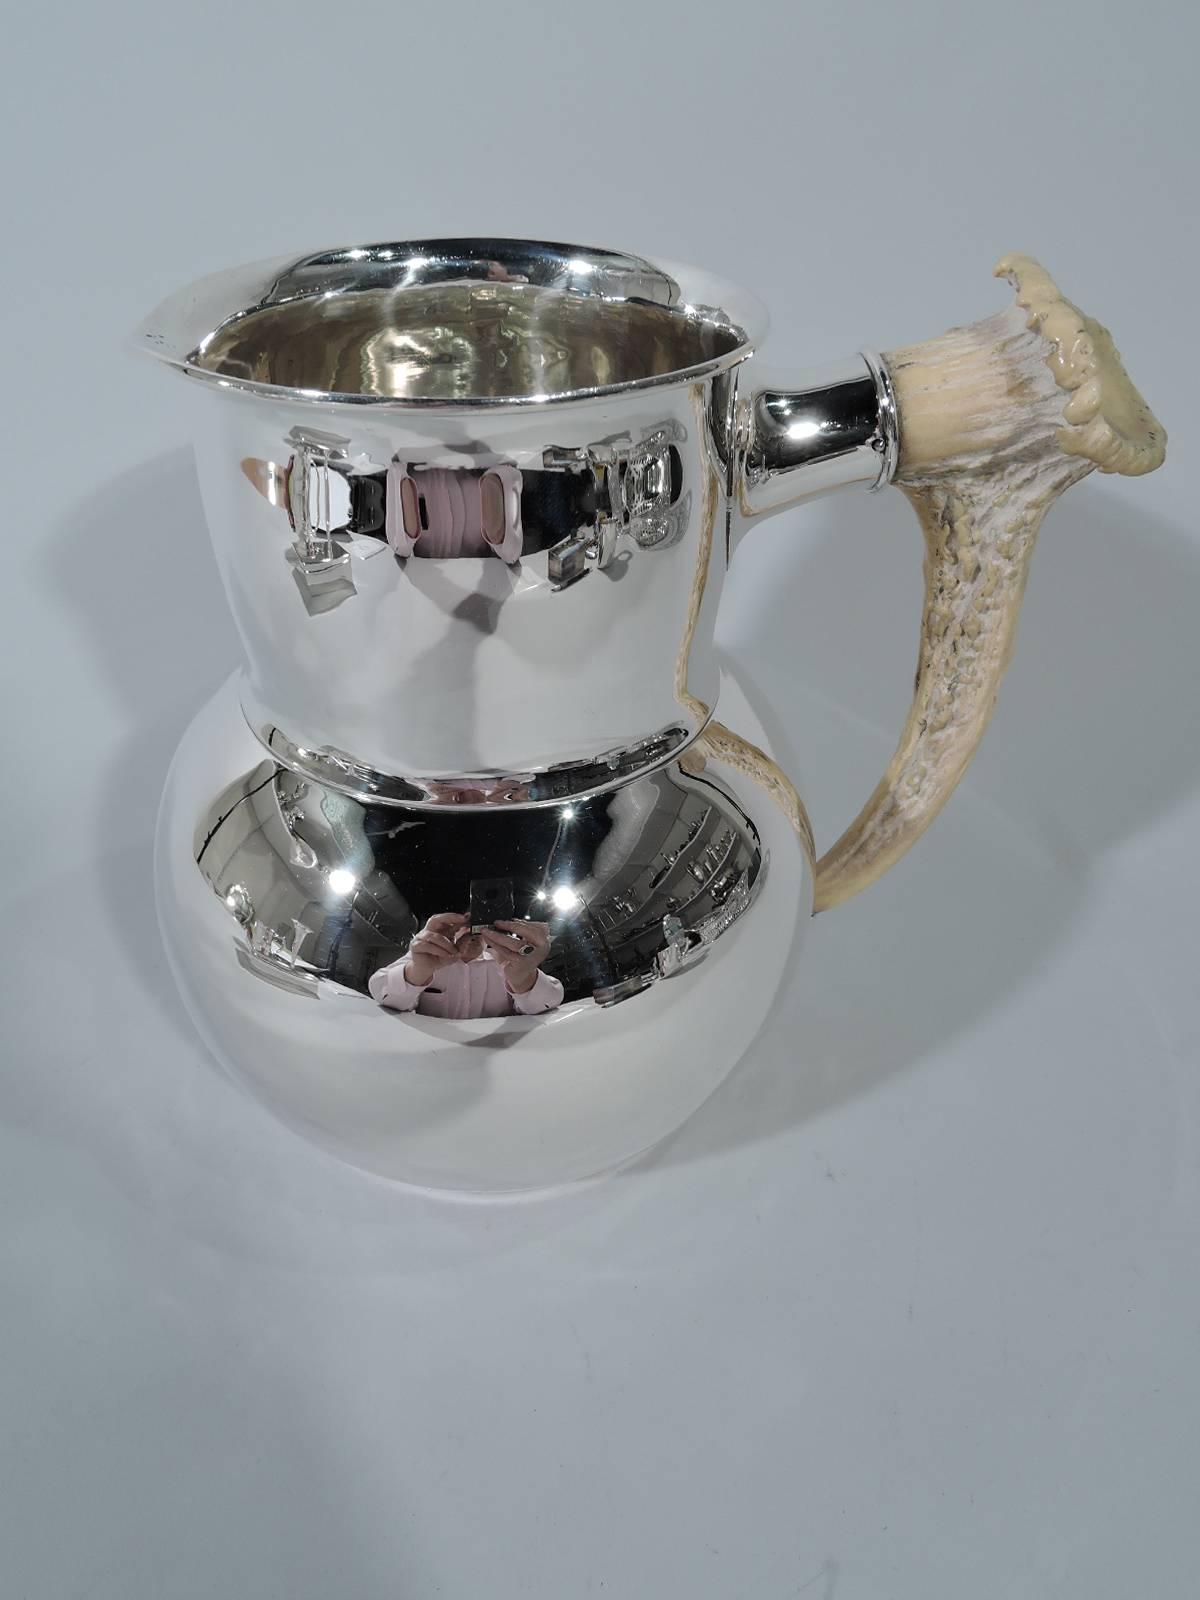 Edwardian sterling silver water pitcher with horn handle. Made by Shreve & Co. in San Francisco. Globular with drum-form neck, discreet lip spout, and silver mounts inset with tactile and irregular antler handle. Big game aesthetic. Hallmark